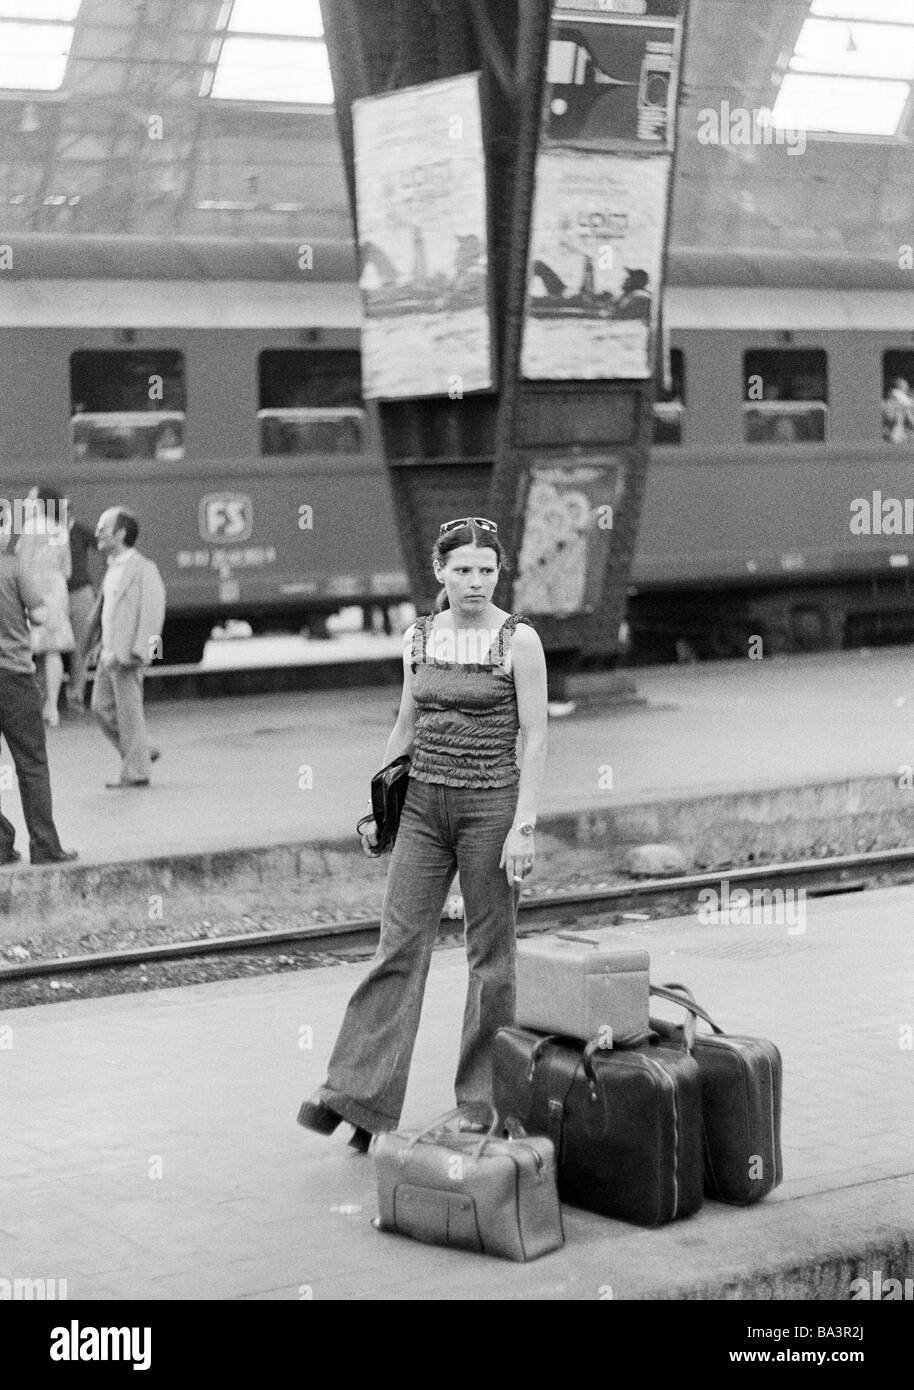 Seventies, black and white photo, railway station, Milan Central Station, young woman stands on the platform and is waiting for the train, suitcases, travel bag, aged 25 to 30 years, Italy, Lombardy, Milan Stock Photo